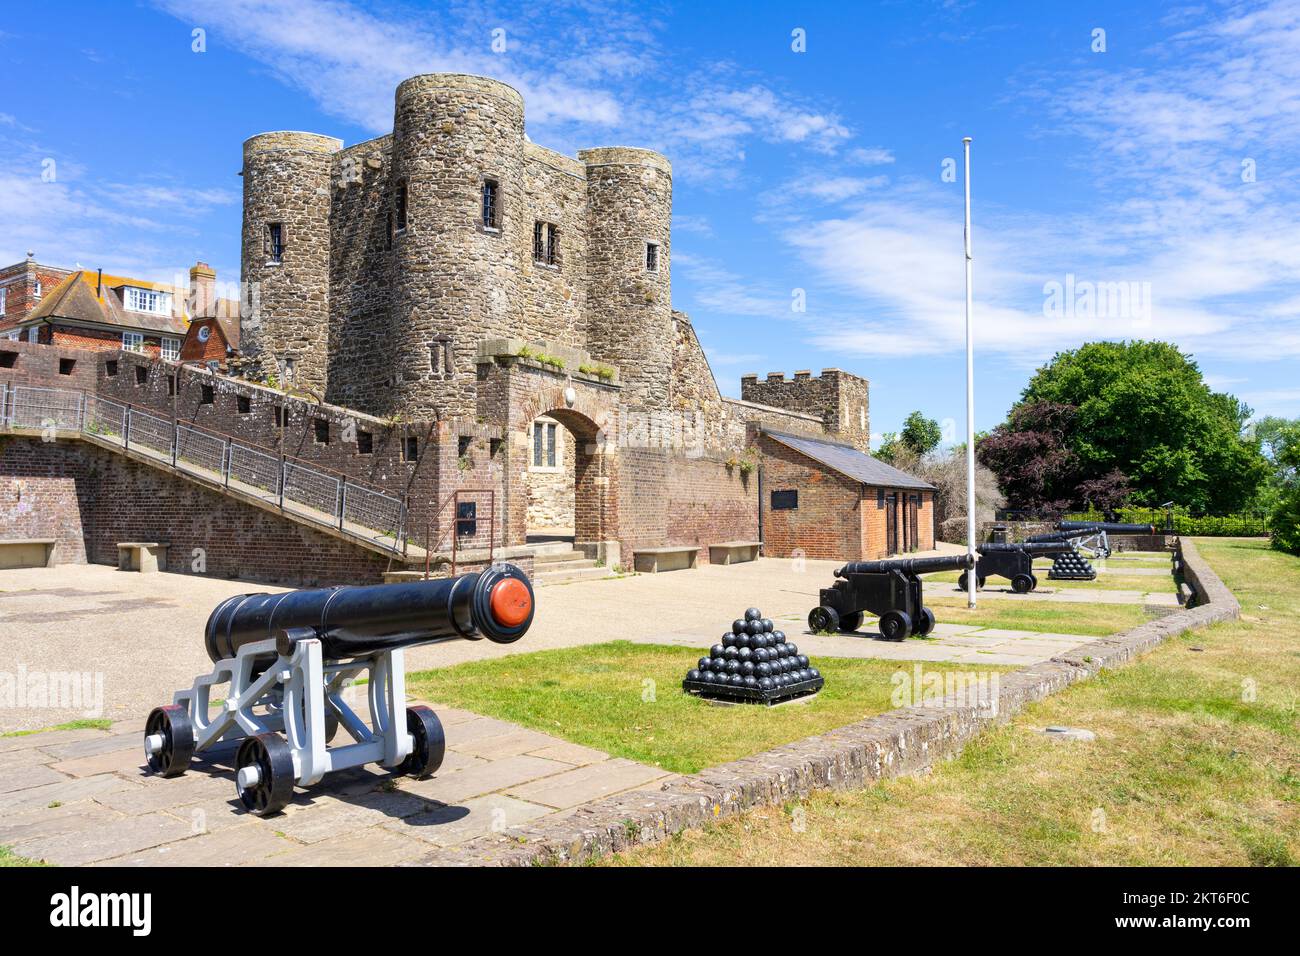 Rye Sussex the Rye Castle Museum or Ypres Tower in the Gungarden Gun Garden Rye East Sussex England UK GB Europe Stock Photo